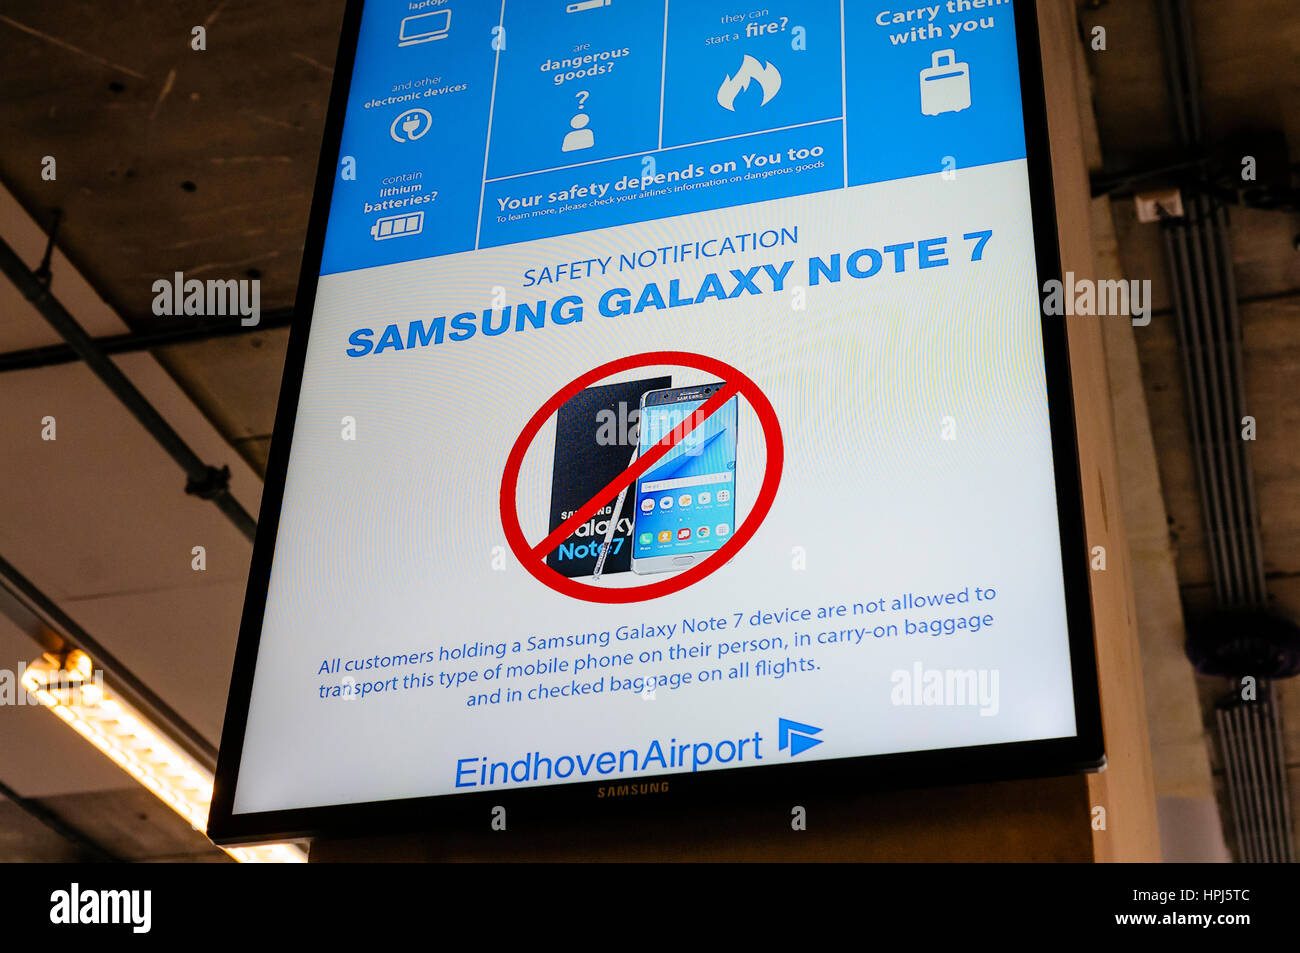 Sign in an airport departure lounge advising passengers that Samsung Galaxy Note 7 mobile phones are banned. Stock Photo